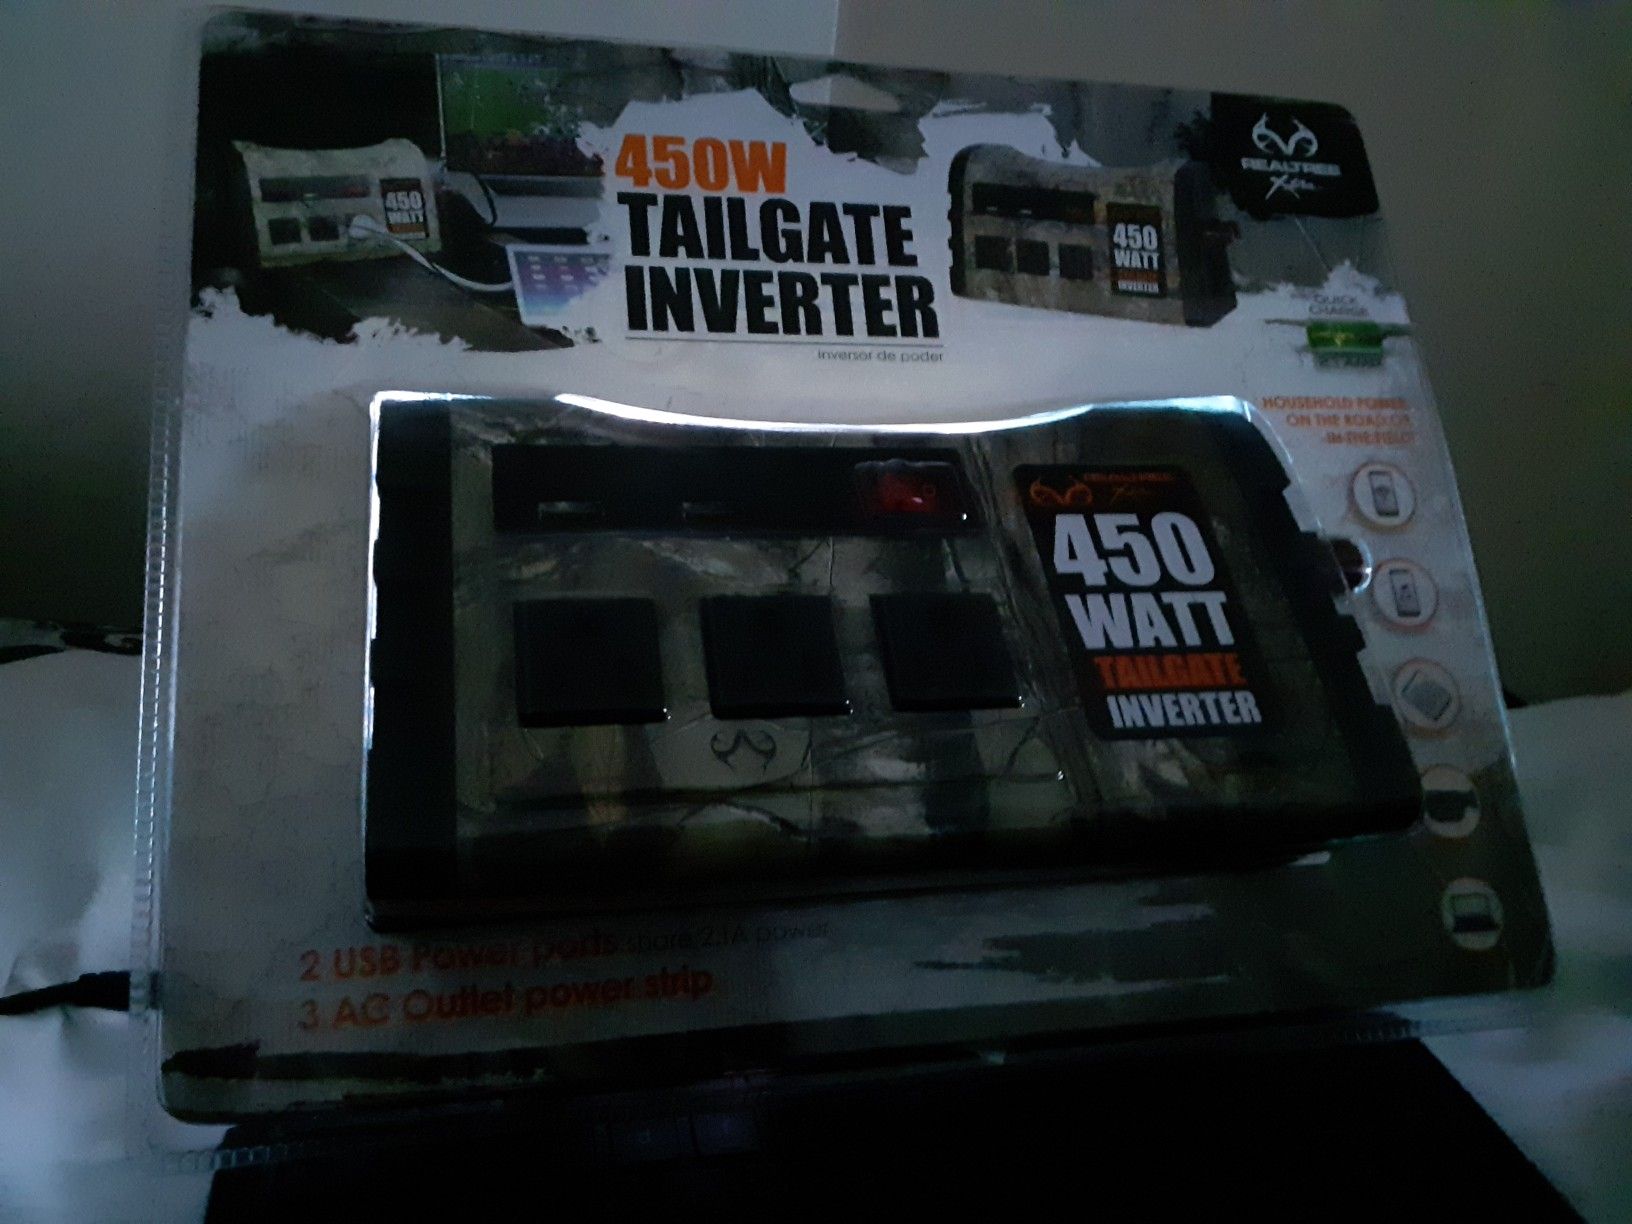 450W Tailgate Inverter Realtree 400W is $50 Deal here